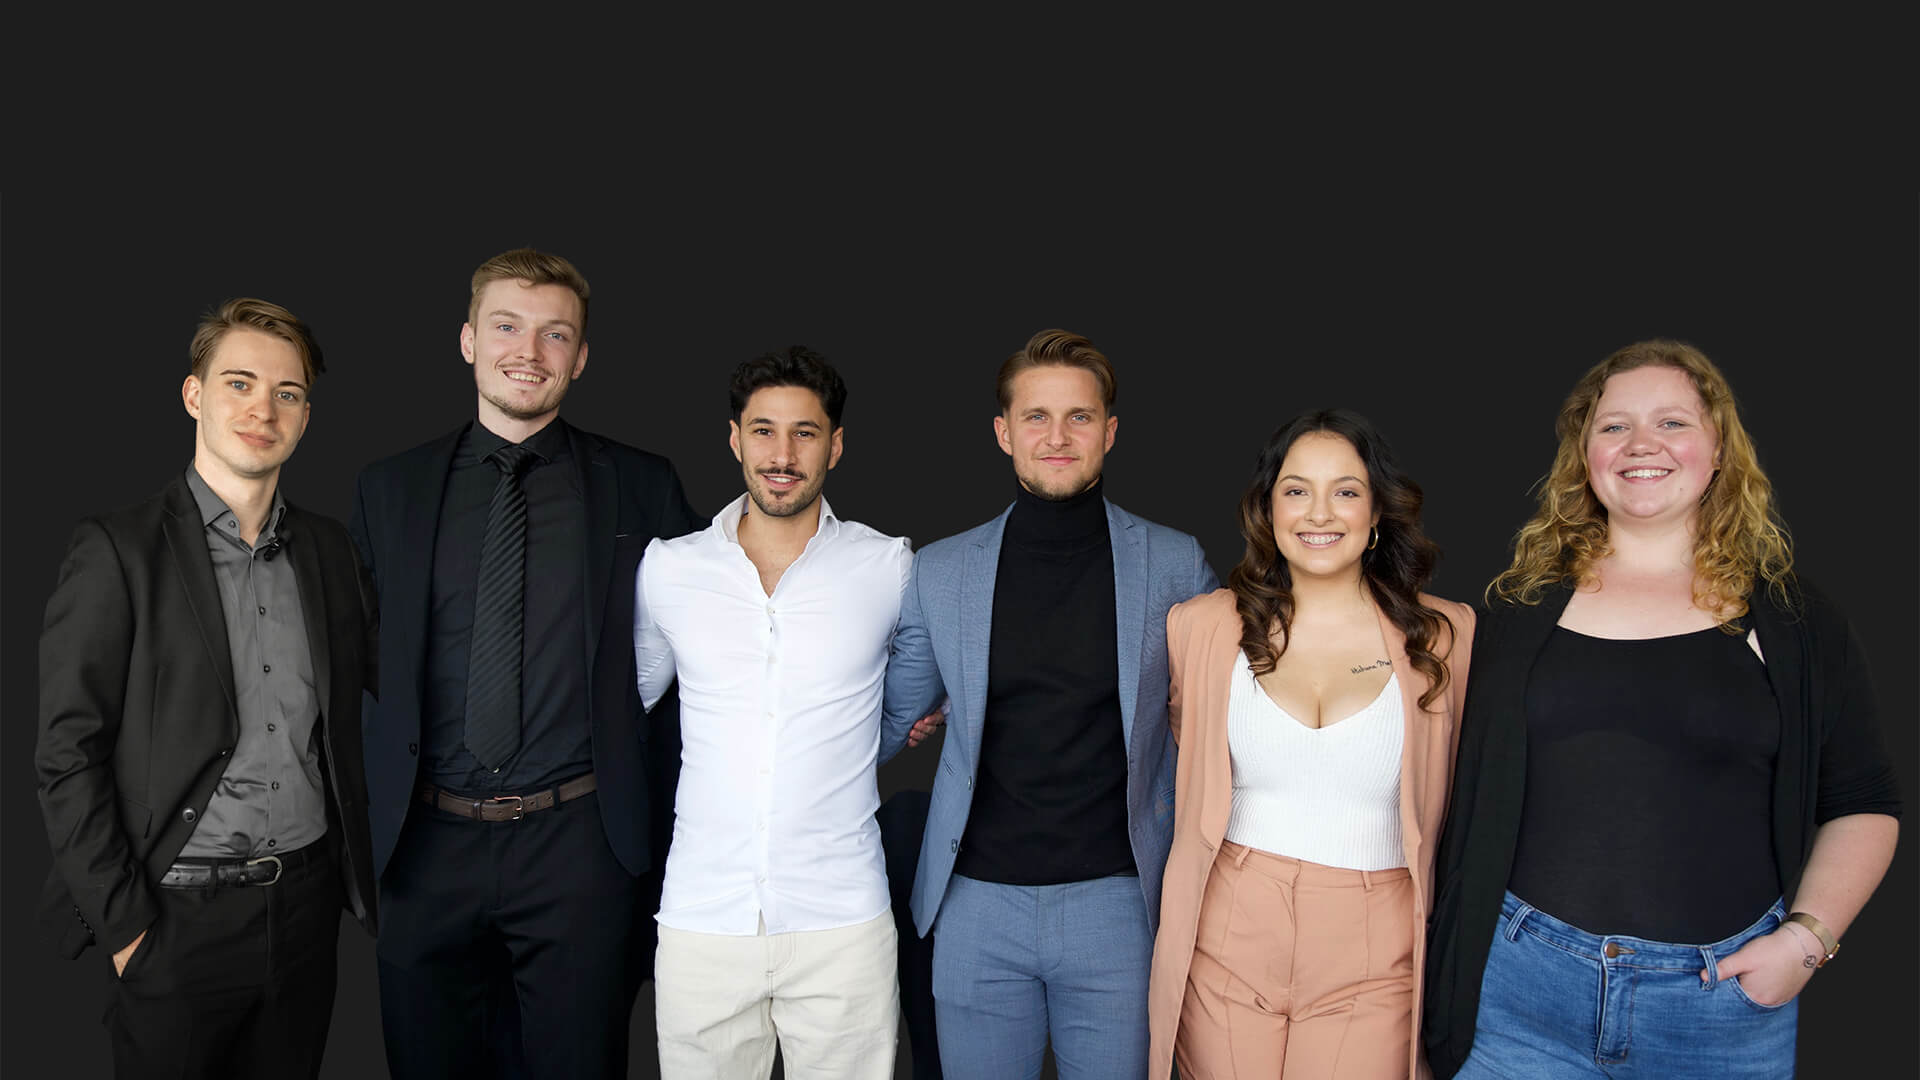 group photo of people posing and smiling